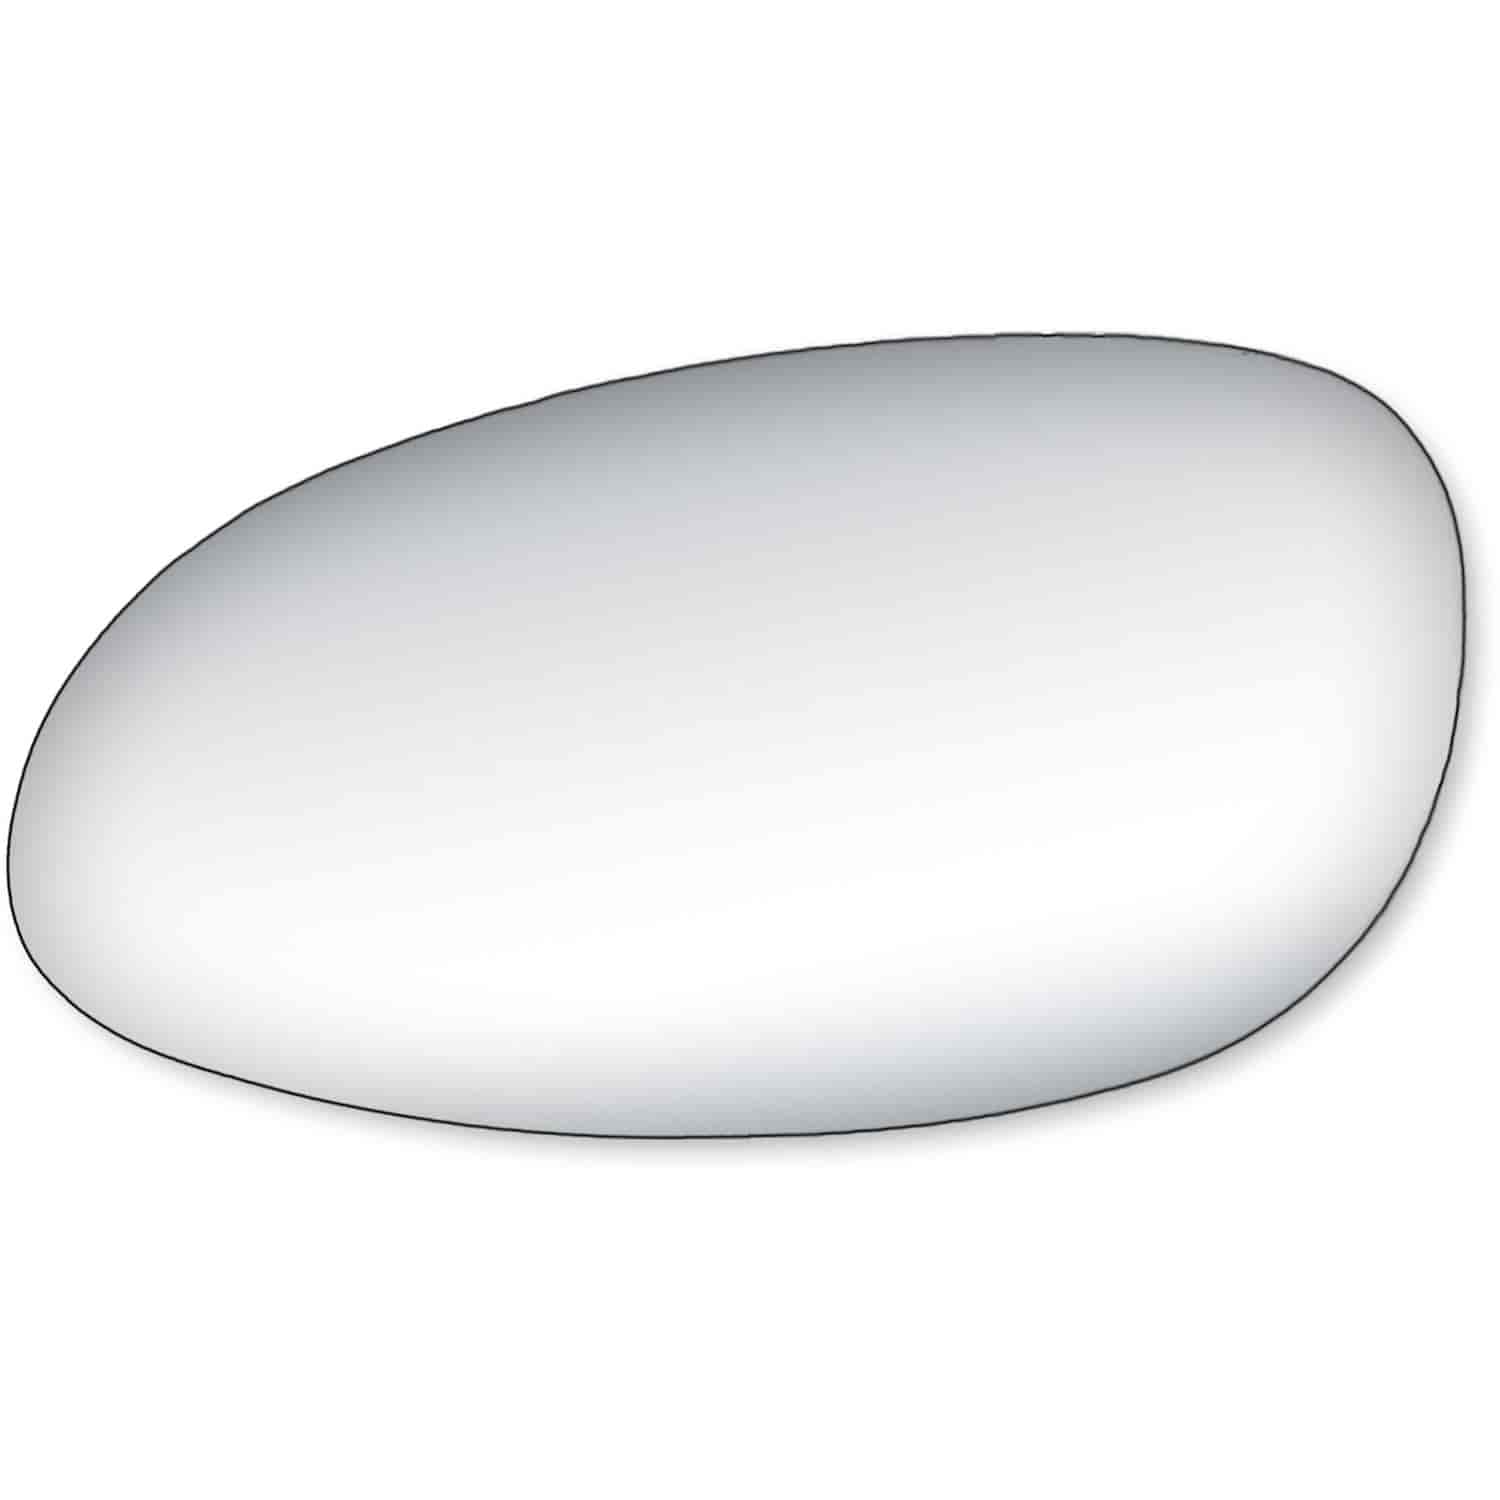 Replacement Glass for 97-05 Century ; 97-05 Regal